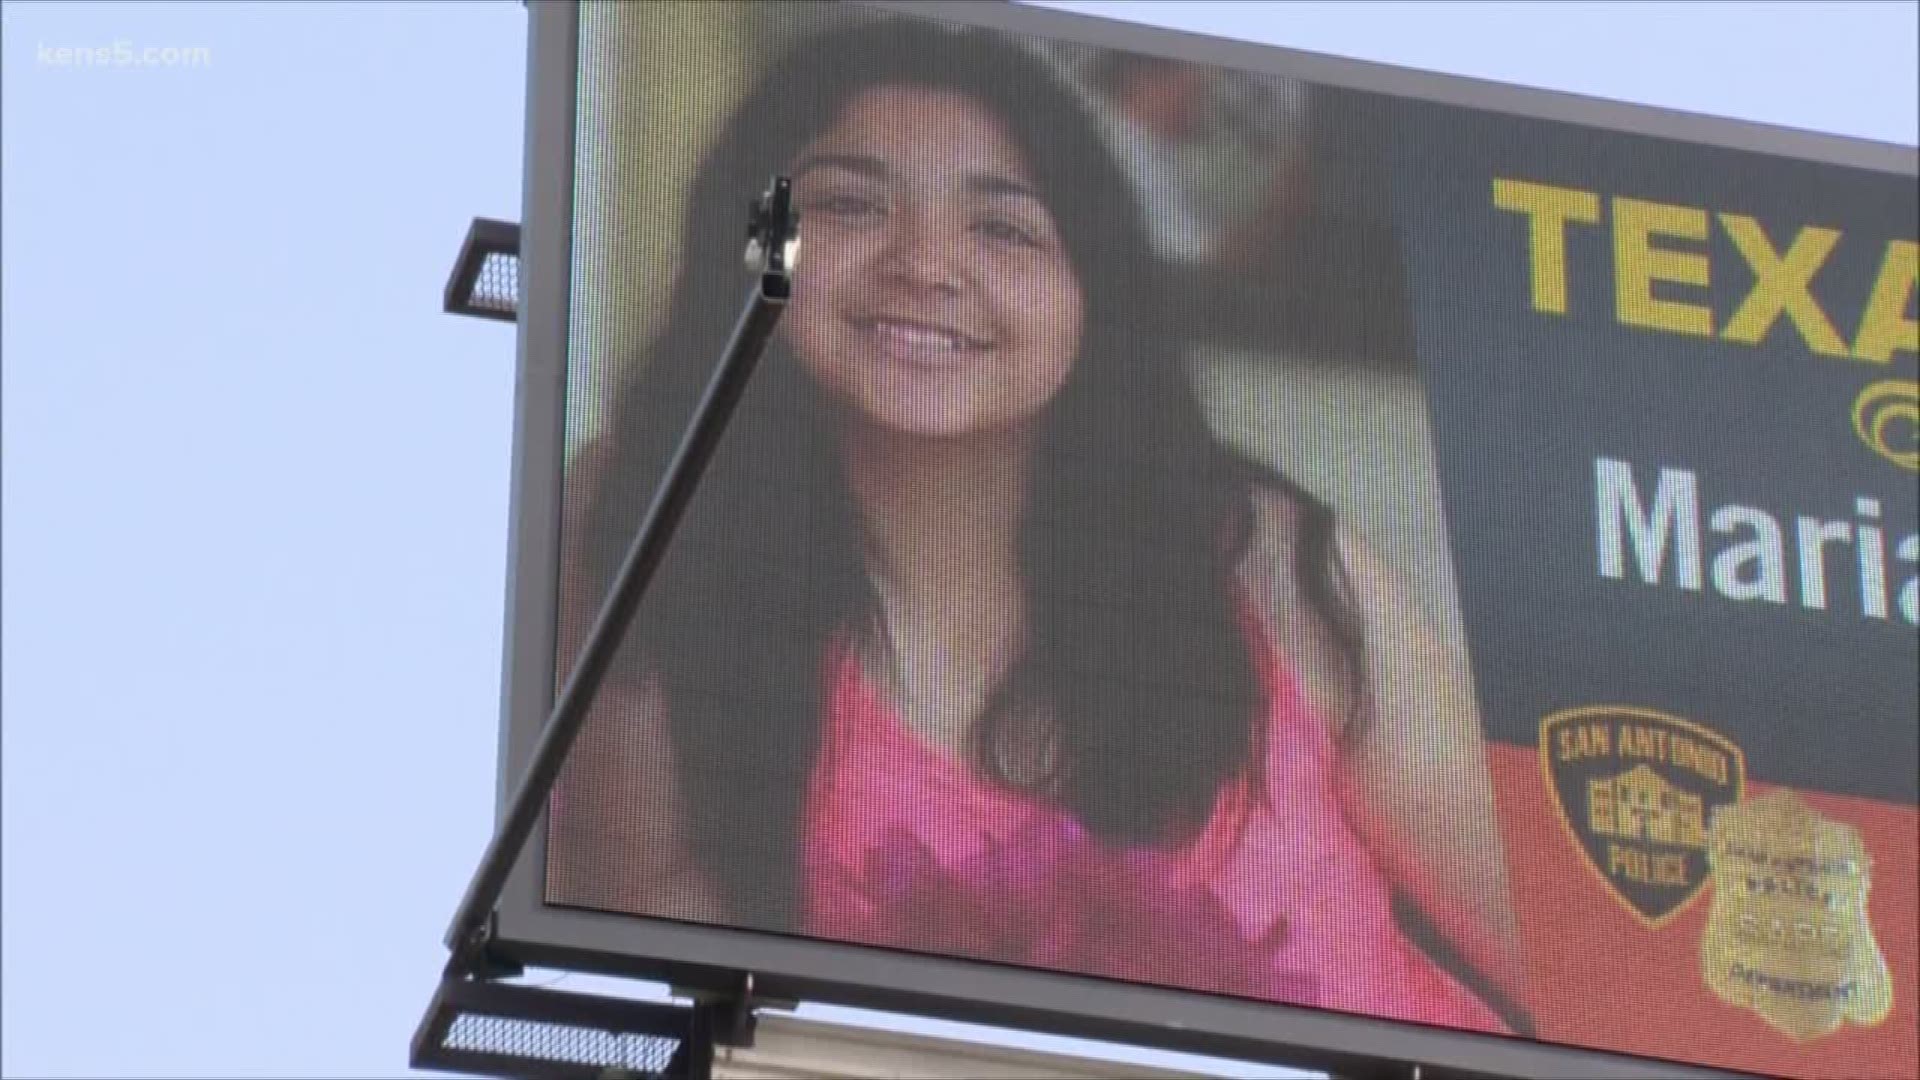 Three years on, Mariah Garcia's family is still searching for her. Now they're hoping a new digital billboard campaign produces new leads.